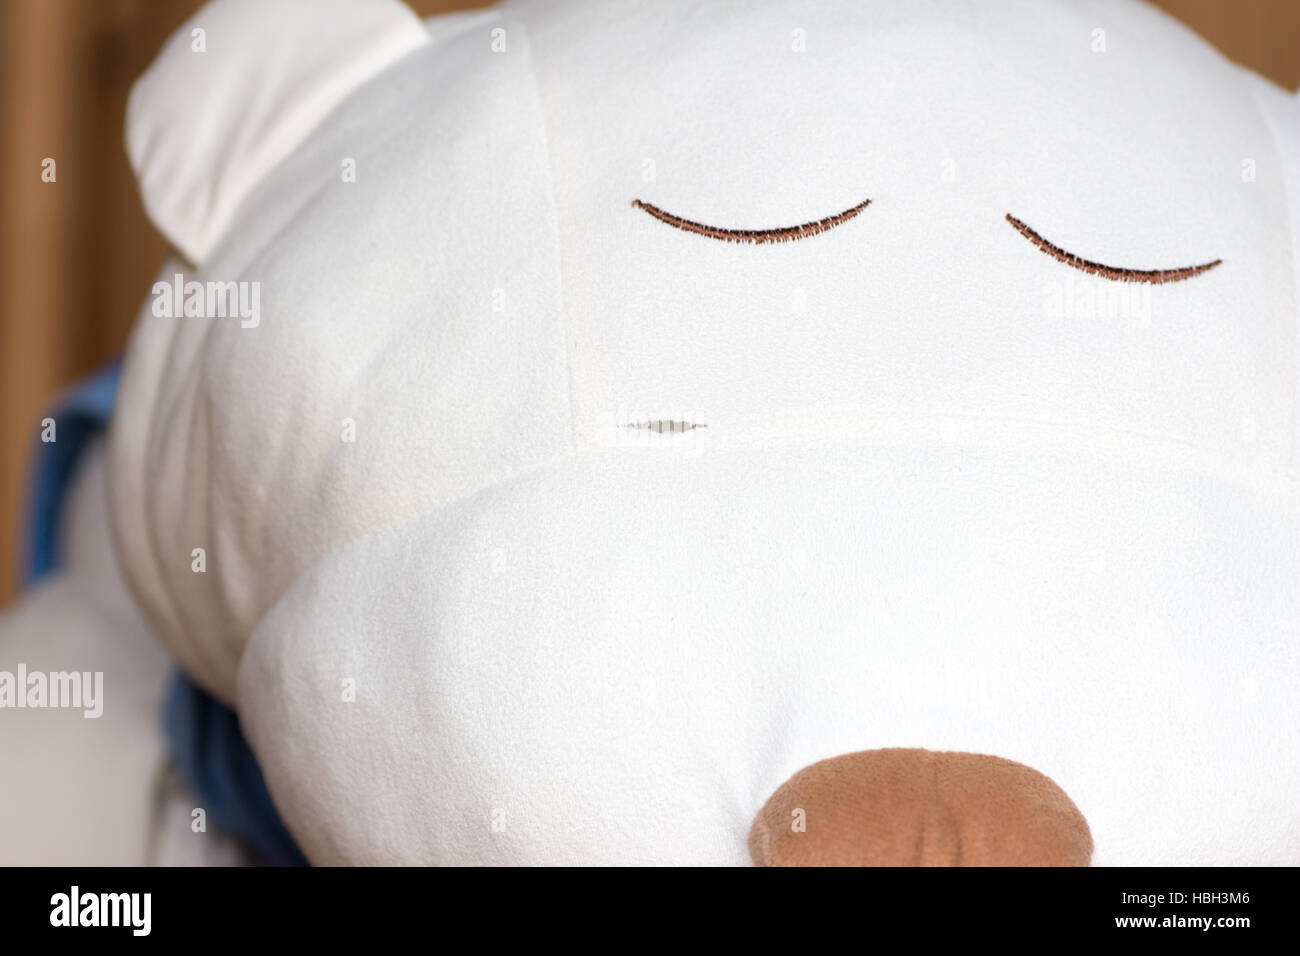 A little rip, ripped, torn, on the face of a white sleeping stuffed bear Stock Photo